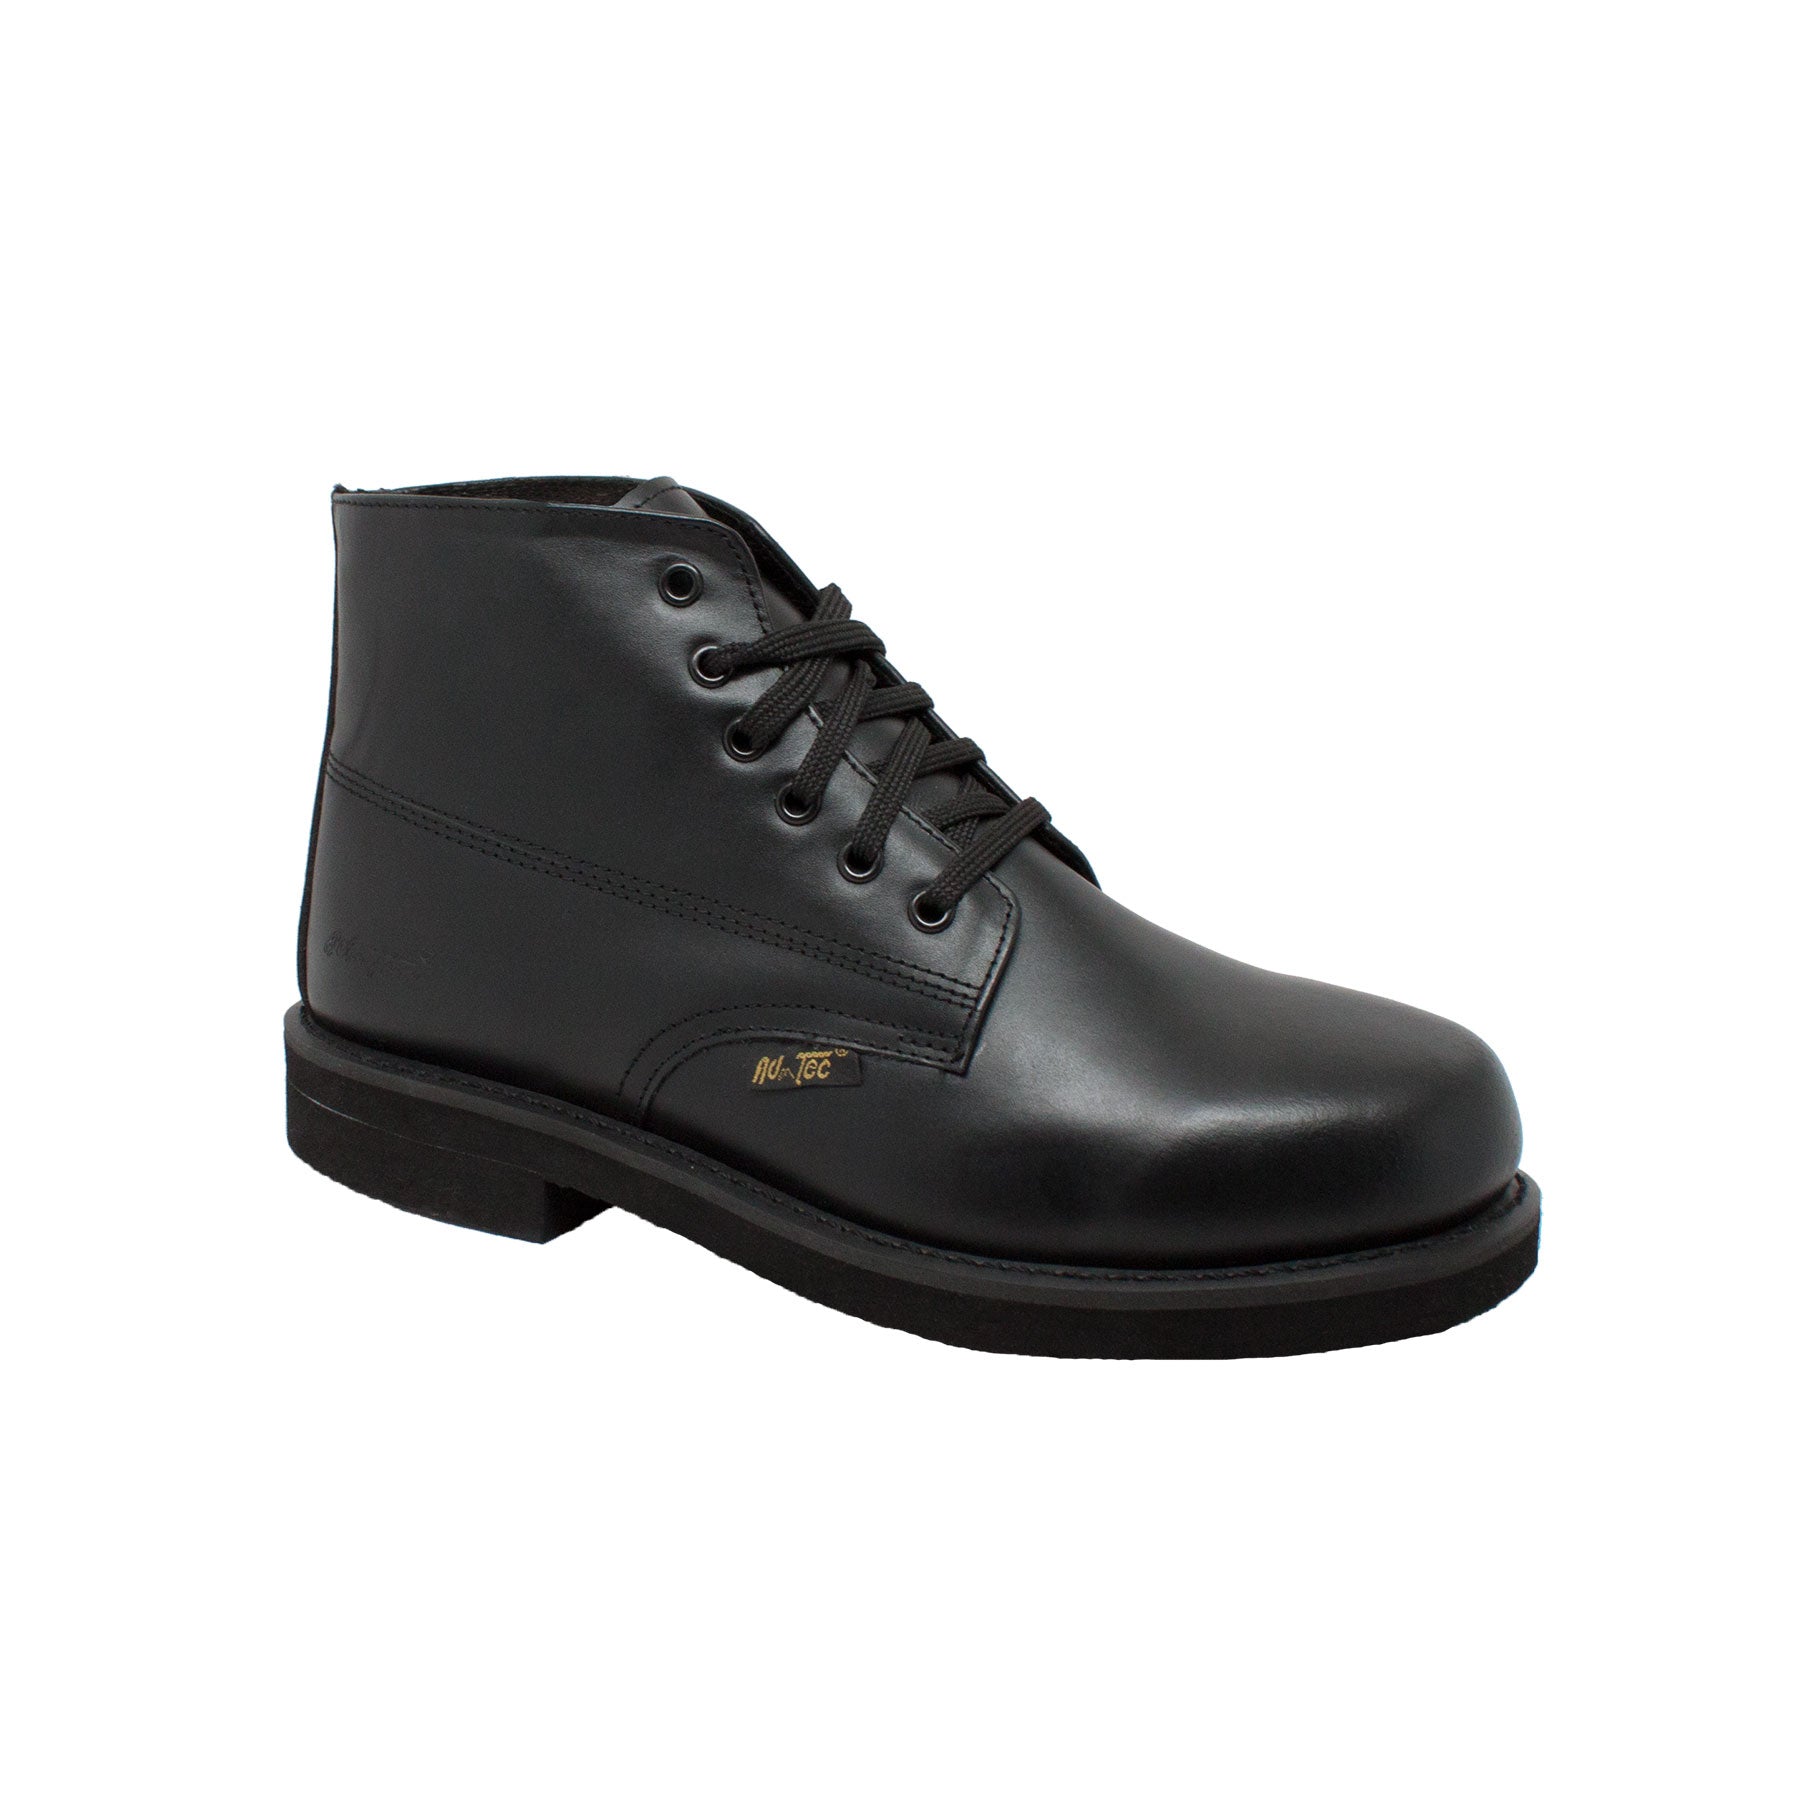 AdTec Mens Black Amish Boot Full Grain Leather Work – The Western Company